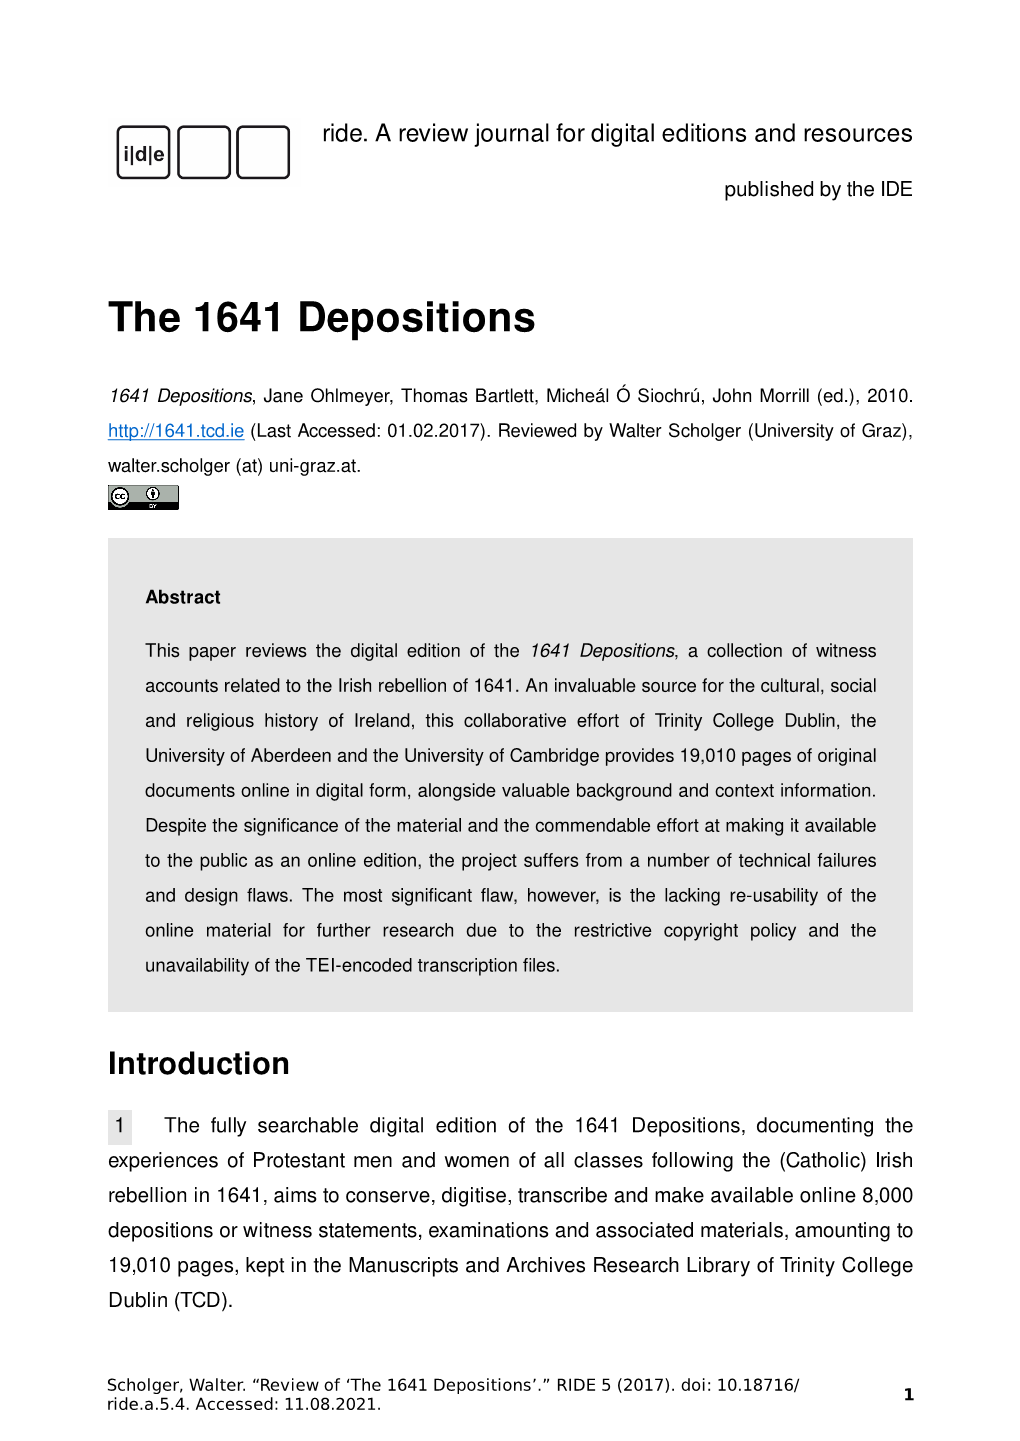 The 1641 Depositions